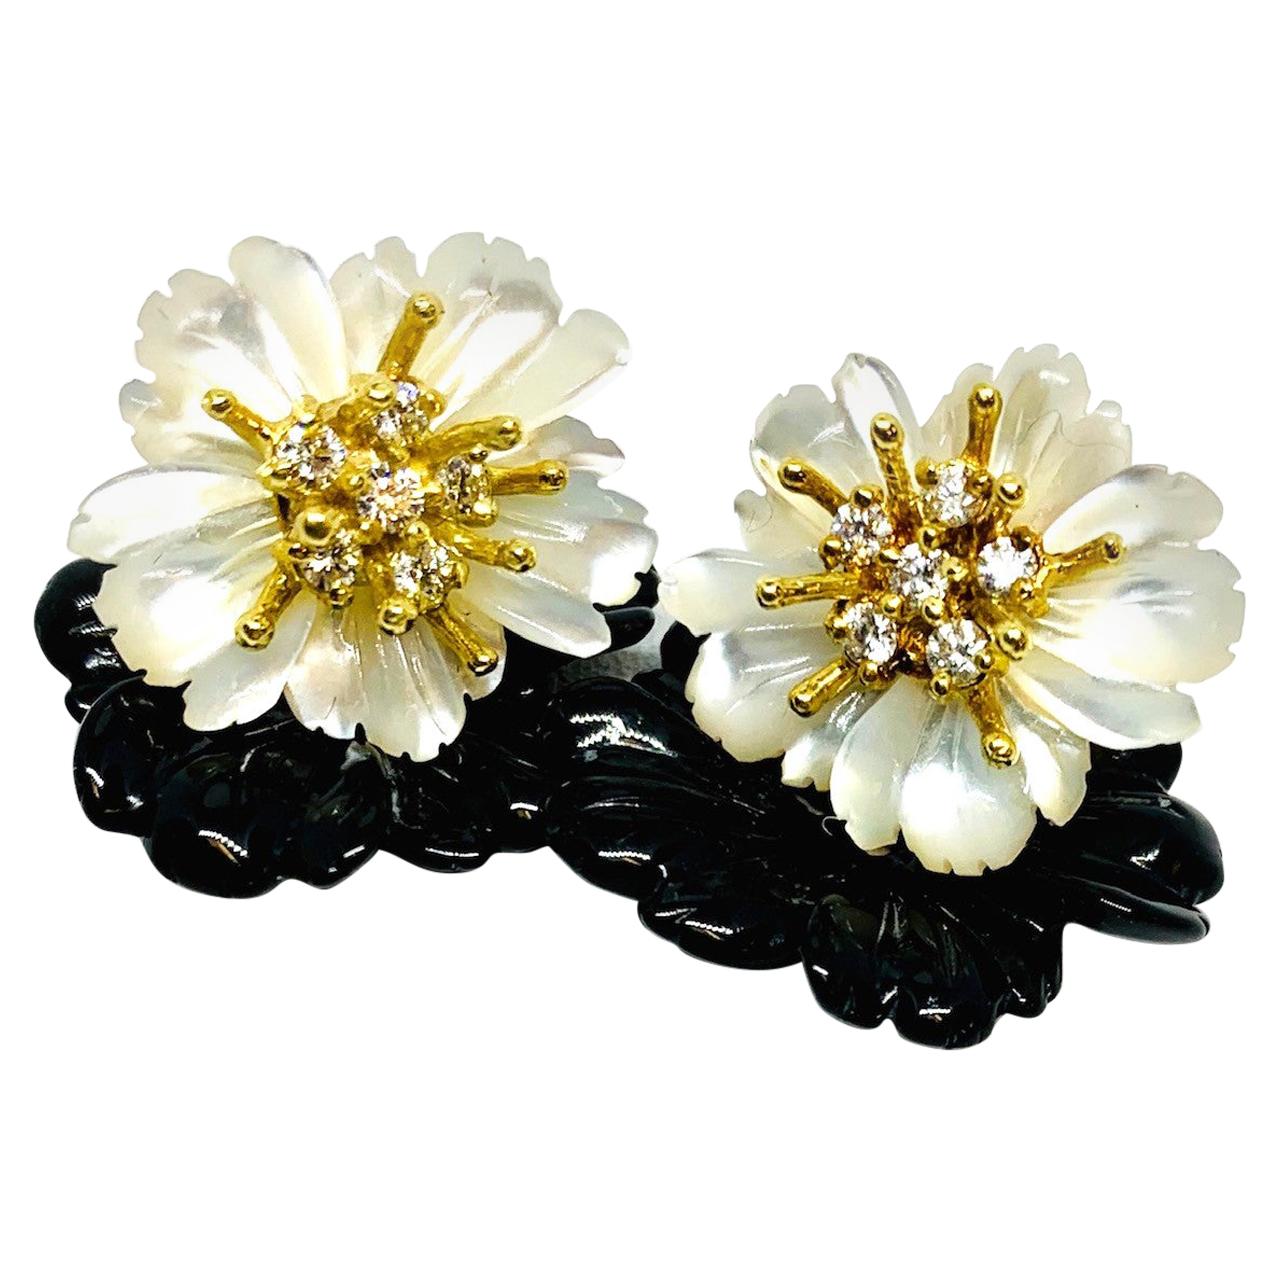 Onyx and Mother-of-Pearl Carved Flower Earring Jackets 18k Gold and Diamonds